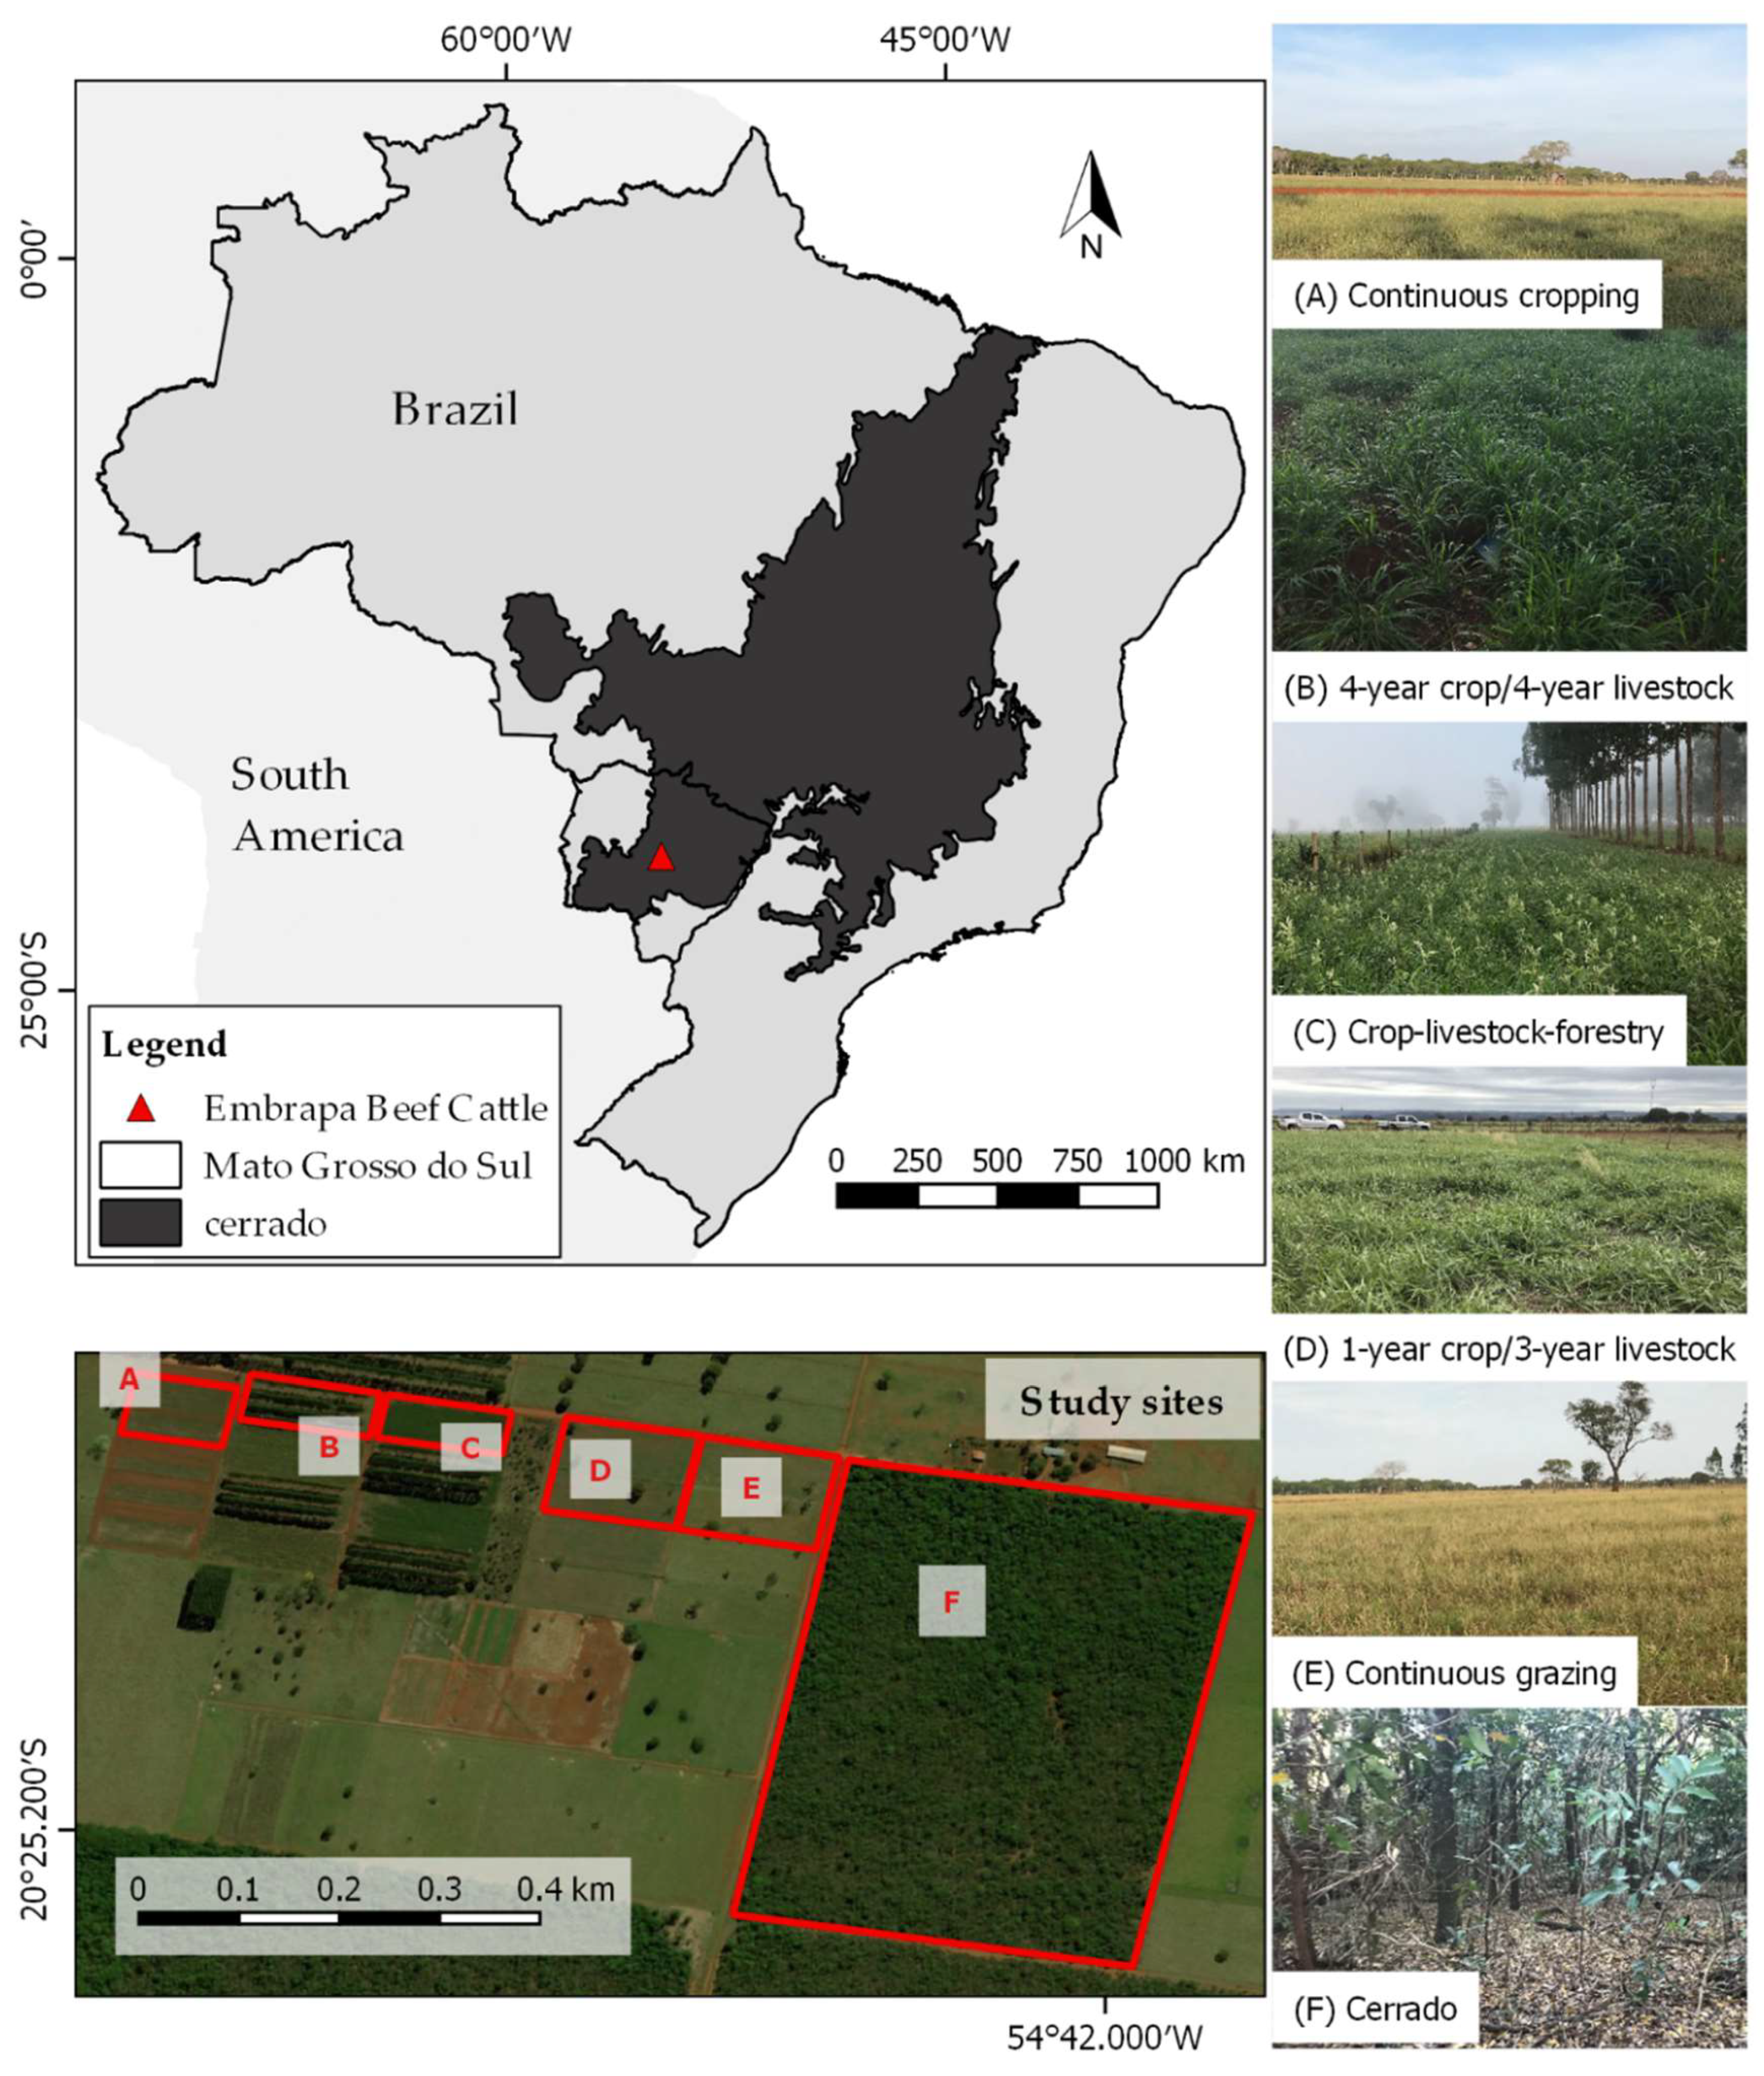 Sustainability | Free Full-Text | Effects of Long-Term Crop-Livestock-Forestry  Systems on Soil Erosion and Water Infiltration in a Brazilian Cerrado Site